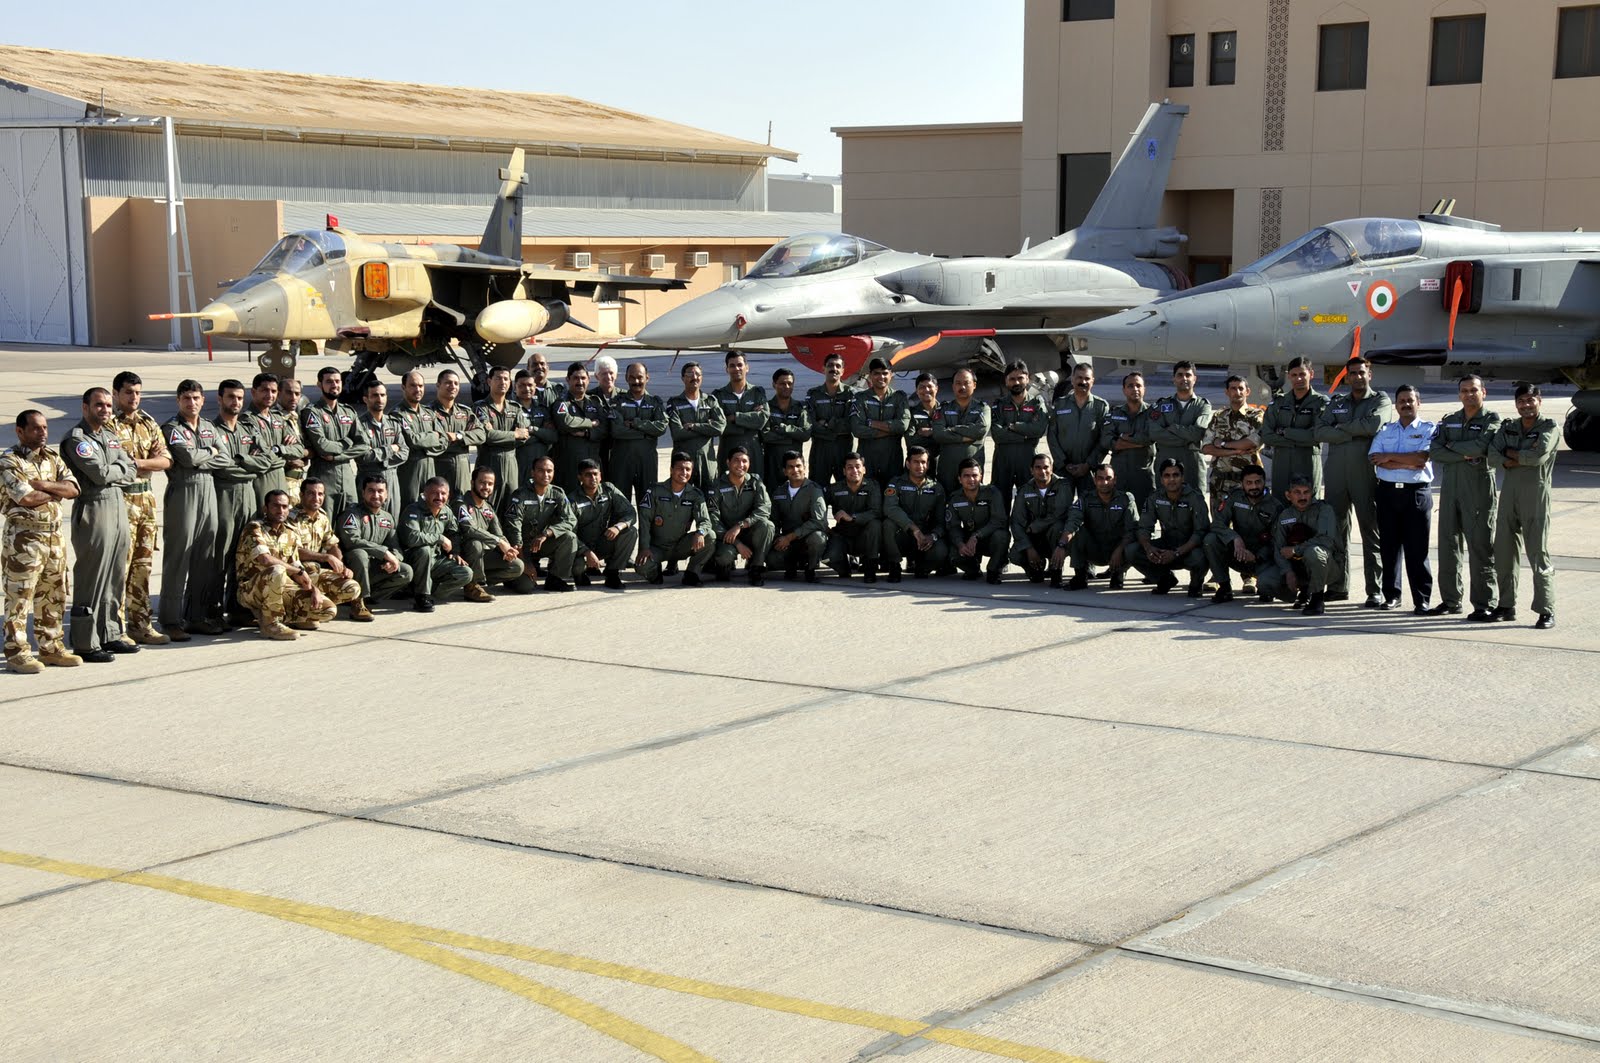 IAF-RAFO+OFFICERS+PARTICIPATING+IN+EX-EASTERN+BRIDGE+POSE+AHEAD+OF+JAGUARS+AND+A+F-16+AT+THUMRAIT,+OMAN-751094.jpg